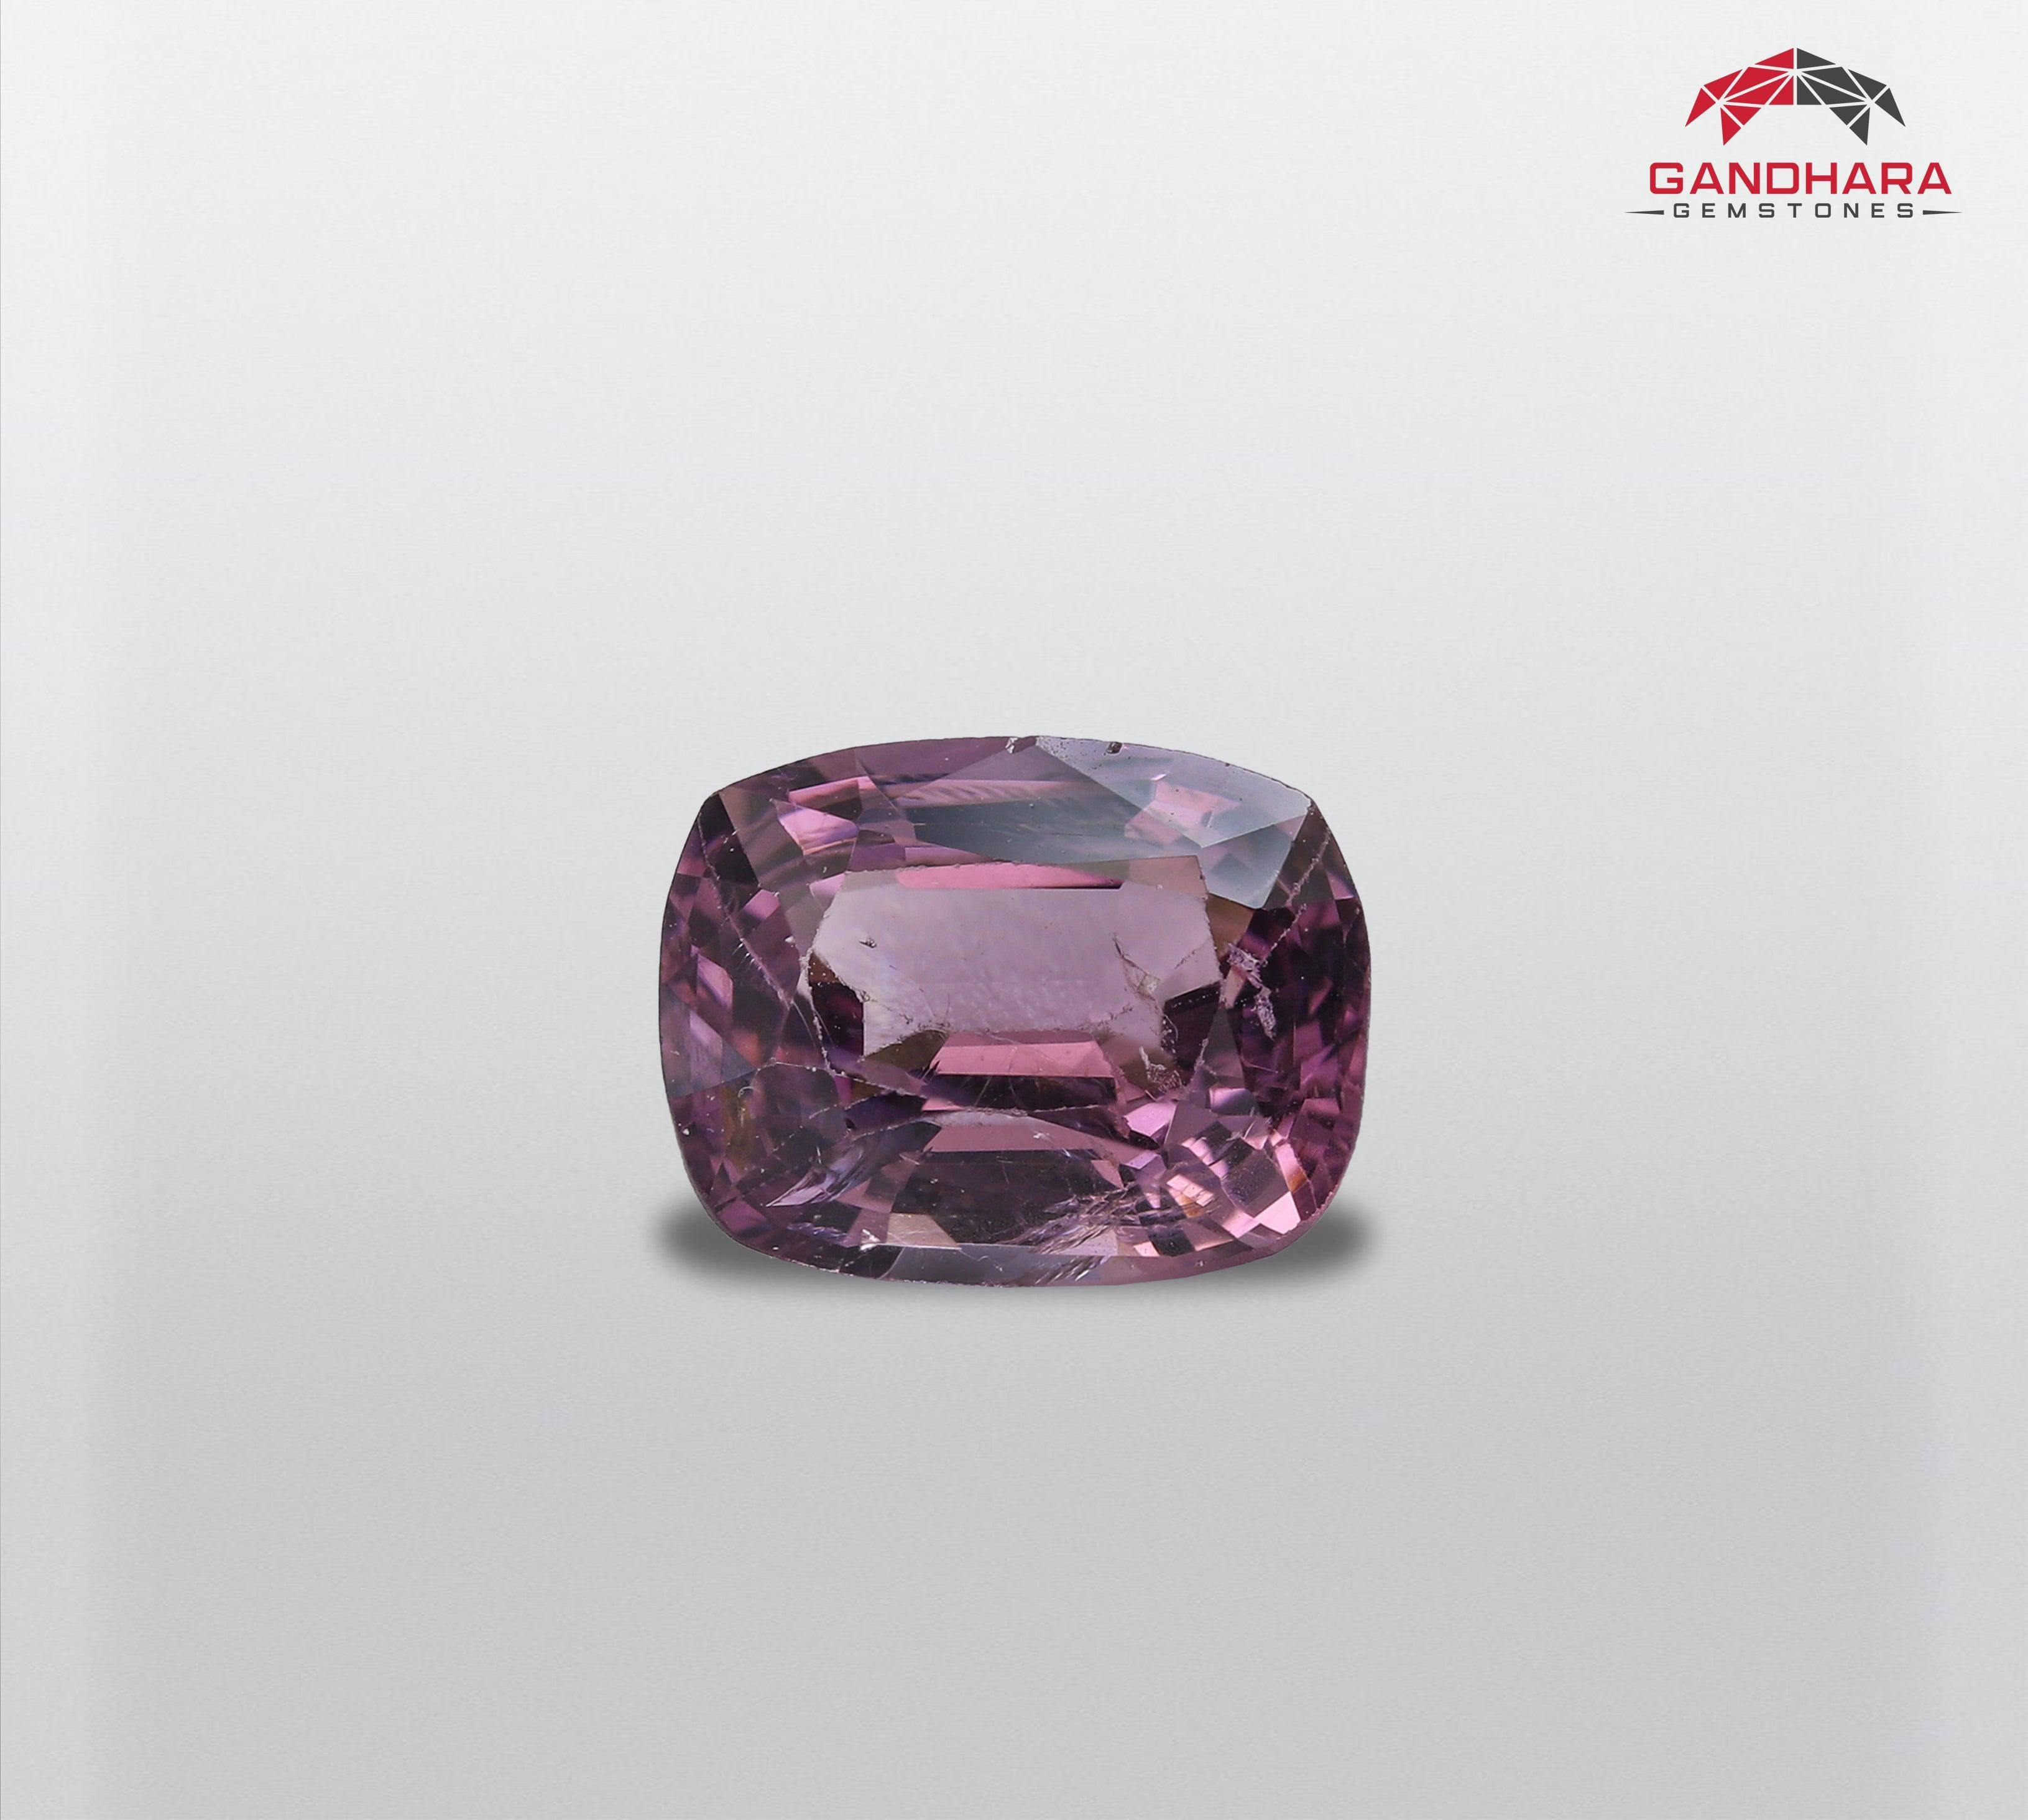 Purplish Pink Natural Spinel Gemstone, available for sale at wholesale price, Flawless SI clarity, custom cushion cut, 1.60 carats loose certified spinel from Burma.

Product Information:
GEMSTONE TYPE:	Purplish Pink Natural Spinel